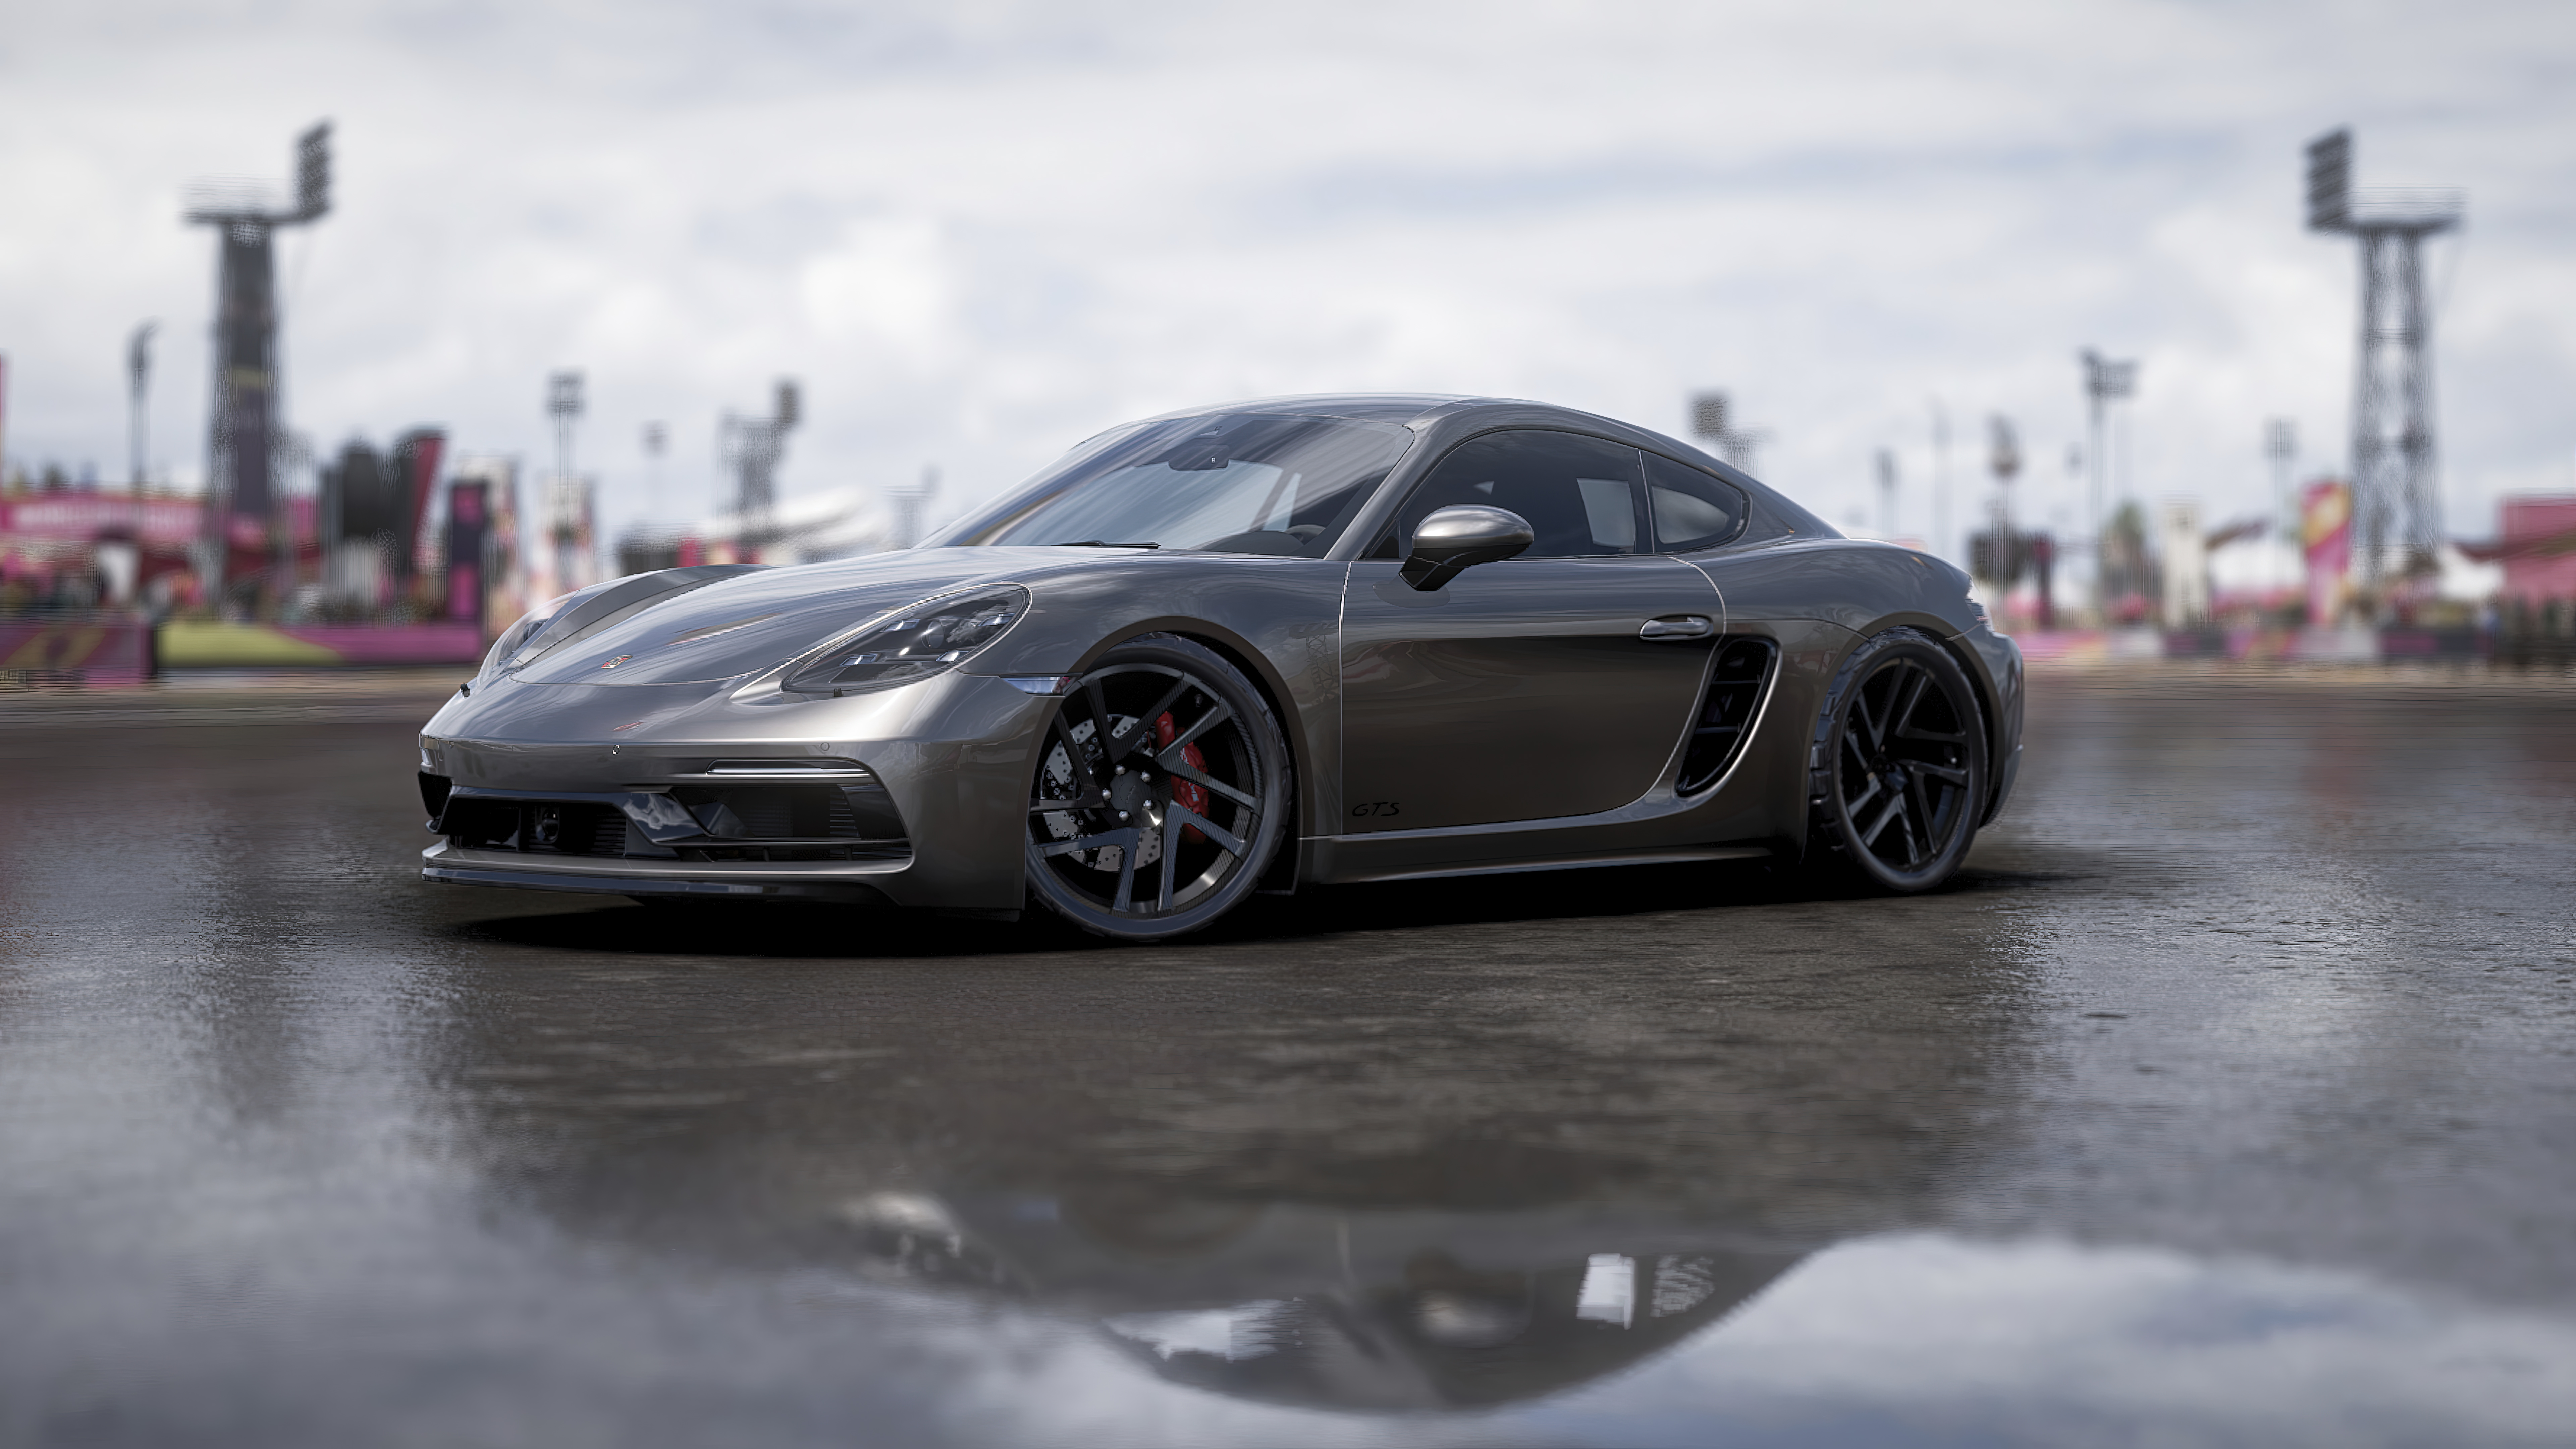 Forza Forza Horizon 5 Forza Horizon Porsche Porsche 911 Car Video Games Reflection Front Angle View 7680x4320